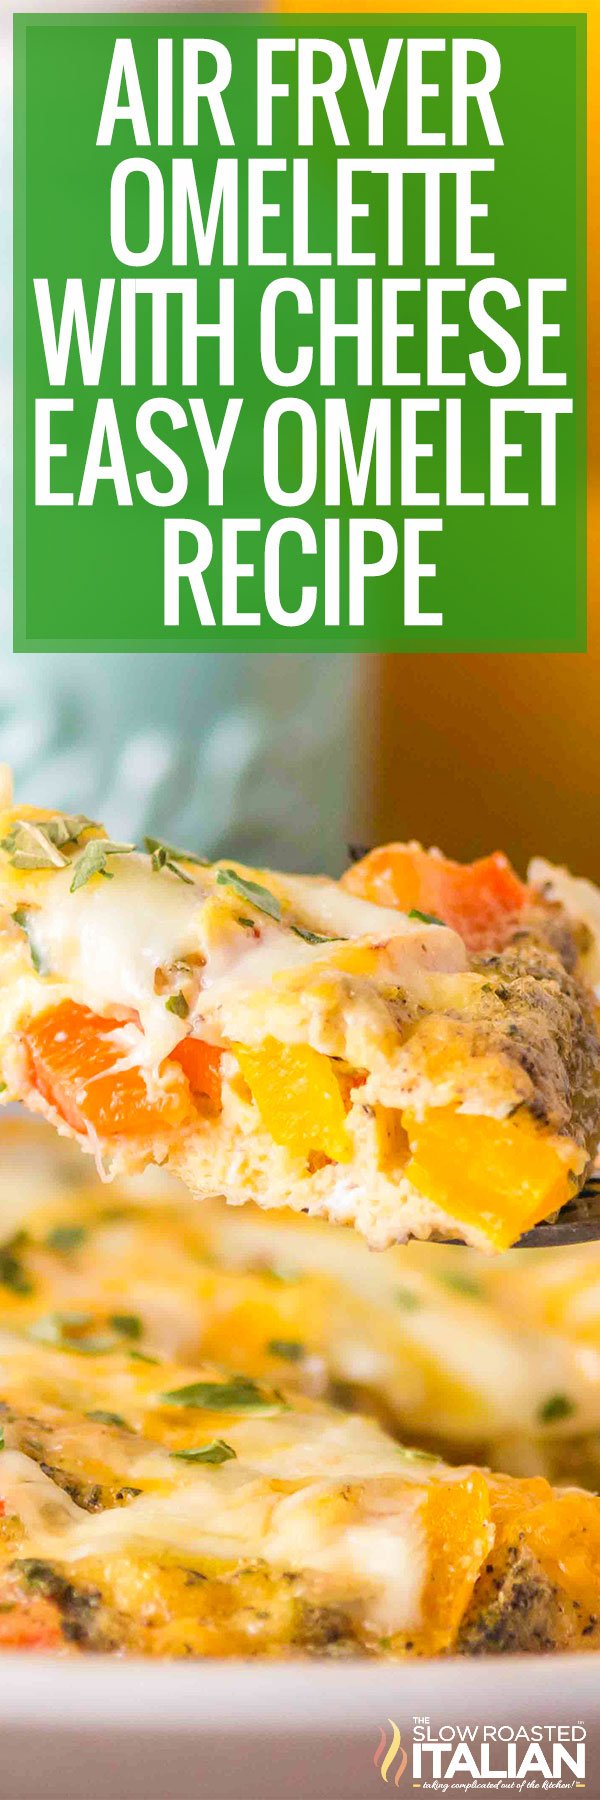 Air Fryer Omelette with Cheese - PIN